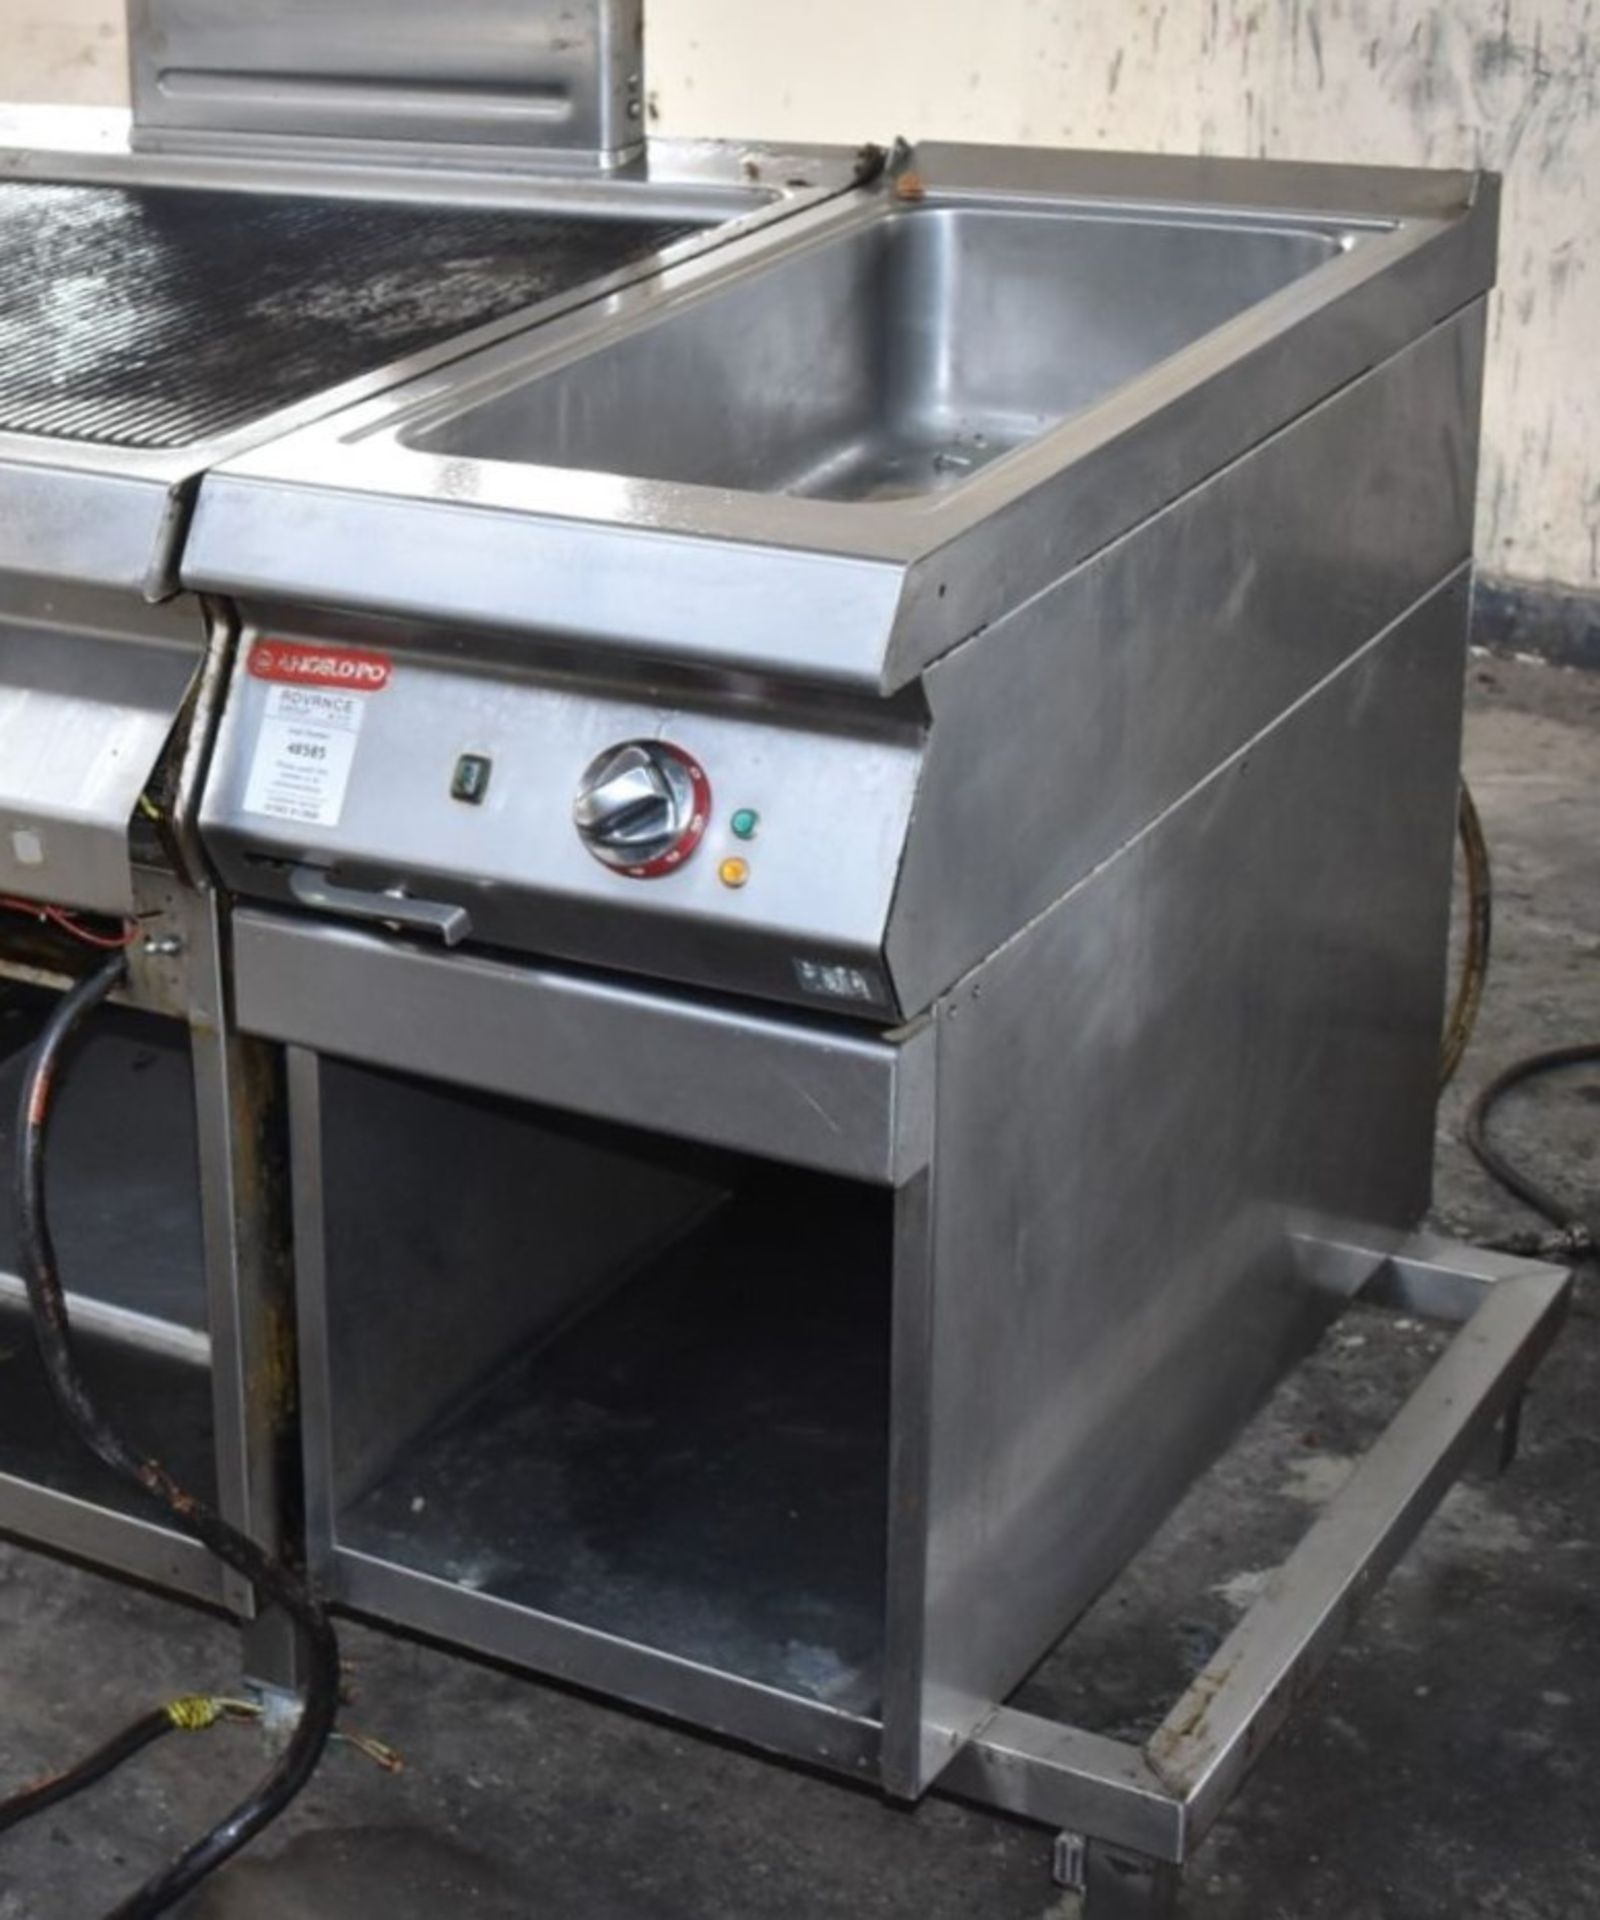 1 x Angelo Po Pasta Boiler on a Modular Base Unit - Width 40cm - Recently Removed From a